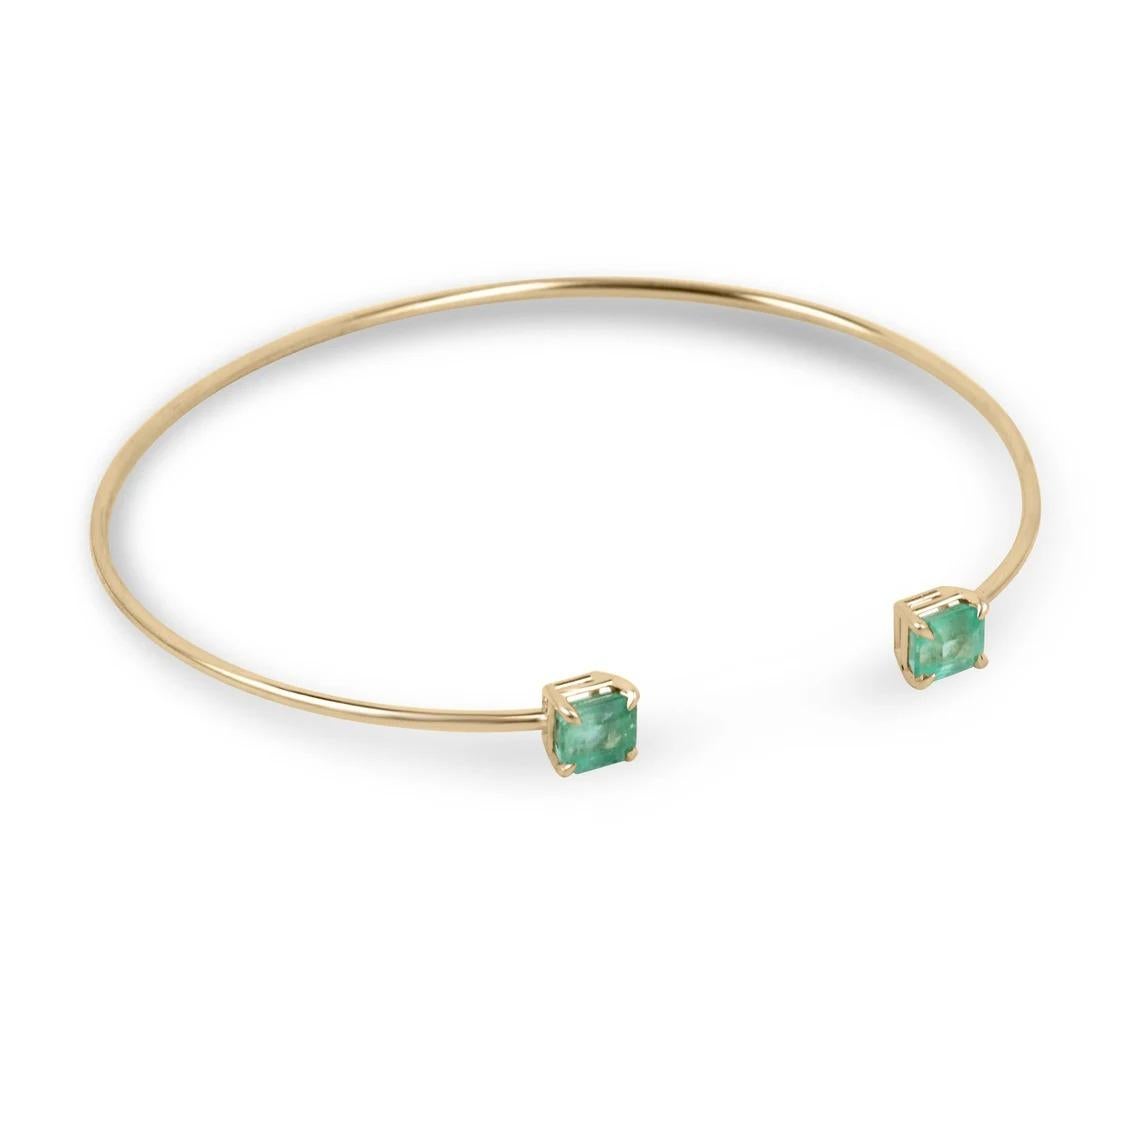 The toi et moi cuff bangle bracelet is a stunning piece of jewelry that symbolizes the intertwining of two individuals. This exquisite bracelet features two asscher cut emeralds, weighing a total of 2.50 carats, set in a four claw prong setting. The